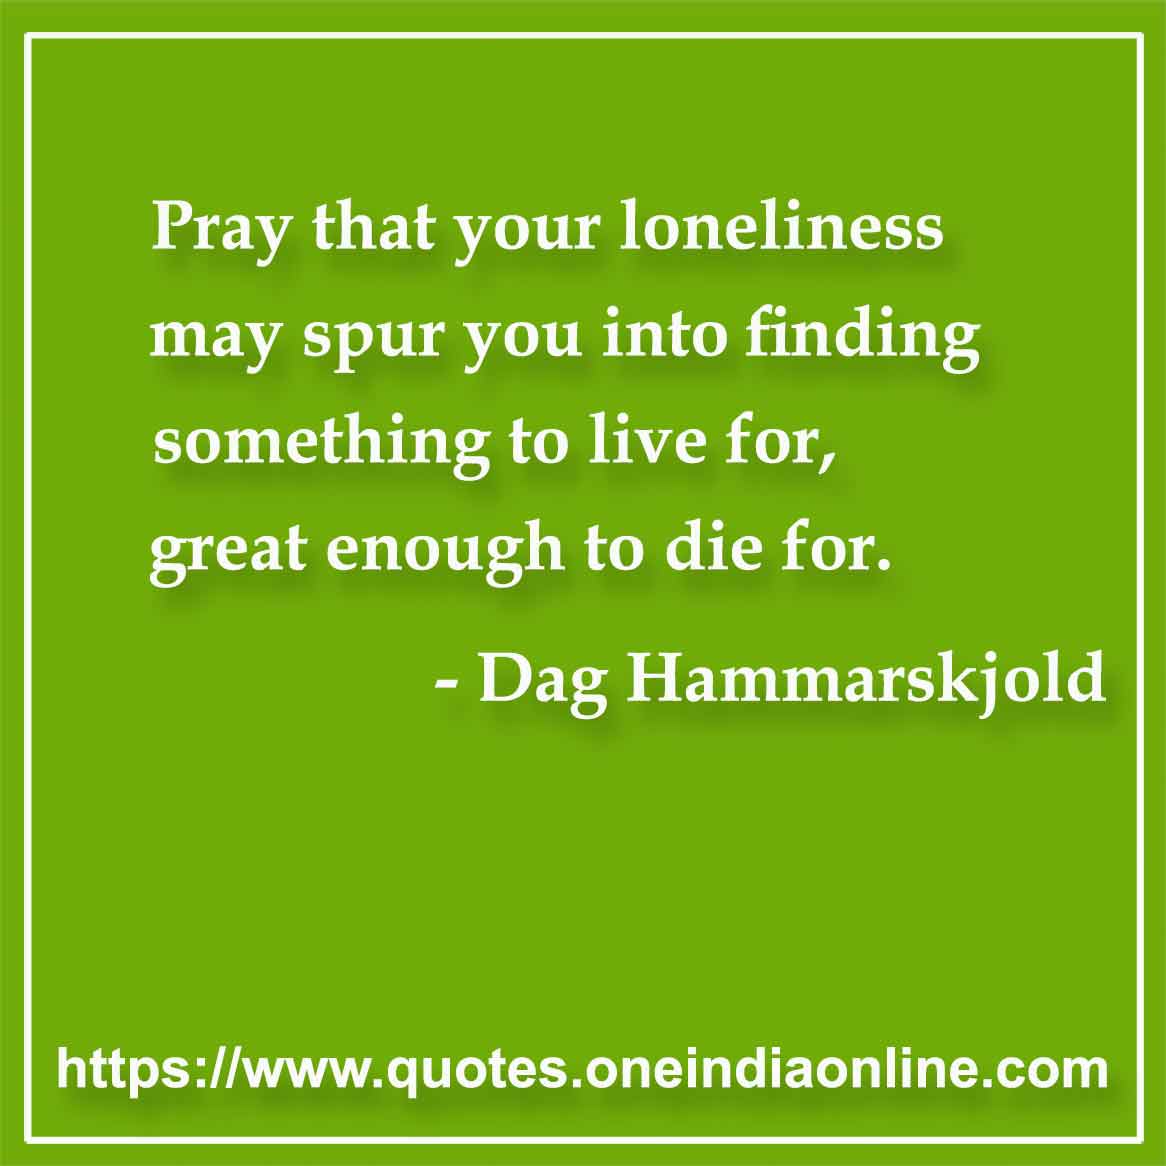 Pray that your loneliness may spur you into finding something to live for, great enough to die for.

- Loneliness Quotes by Dag Hammarskjold